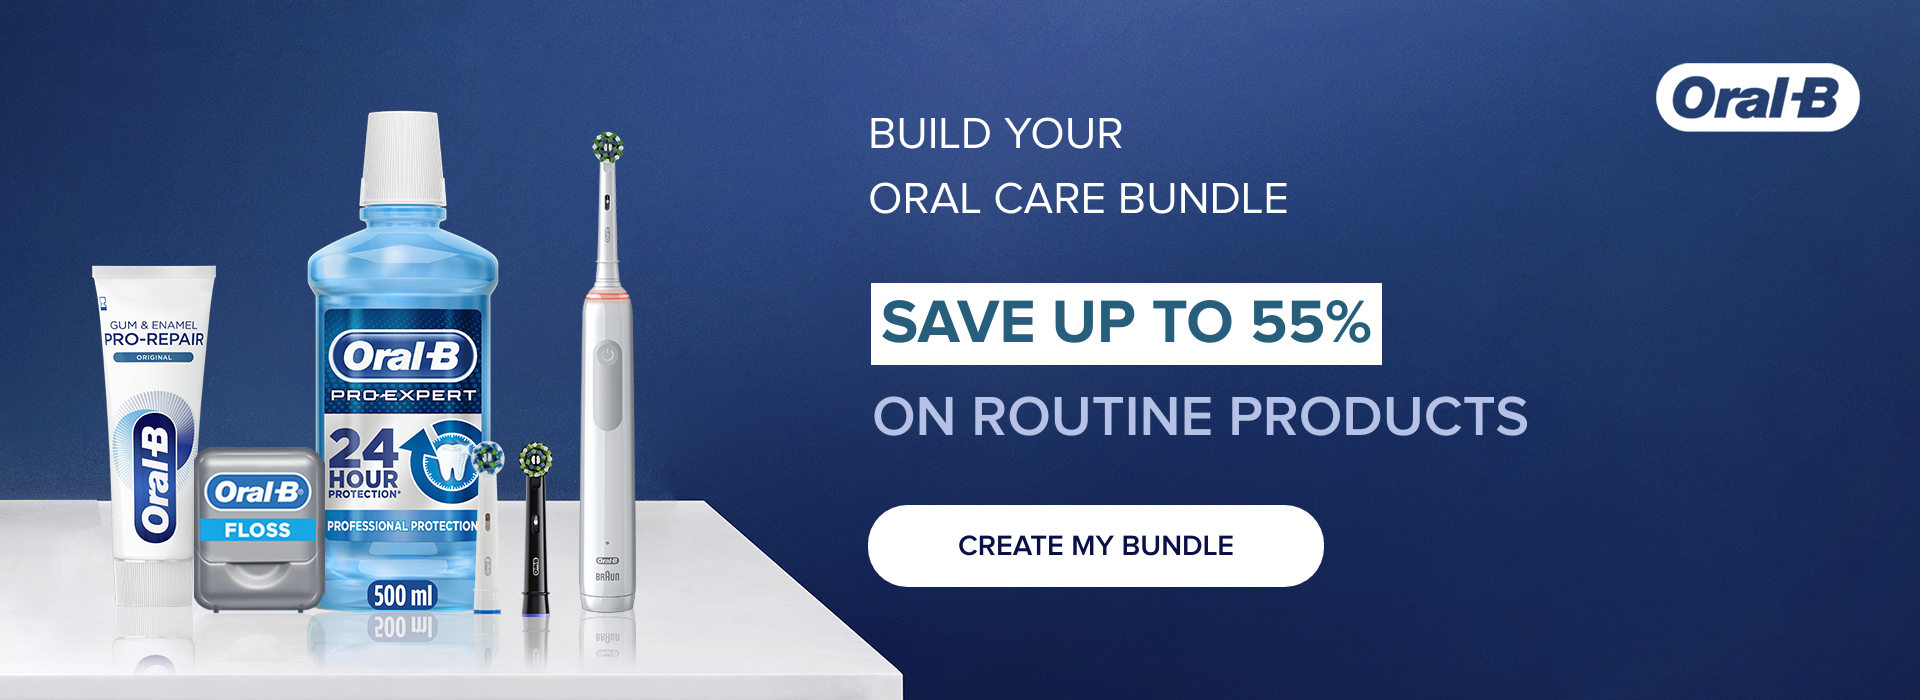 Build your oral care bundle. Save up to 55% on routine products. Create my bundle.